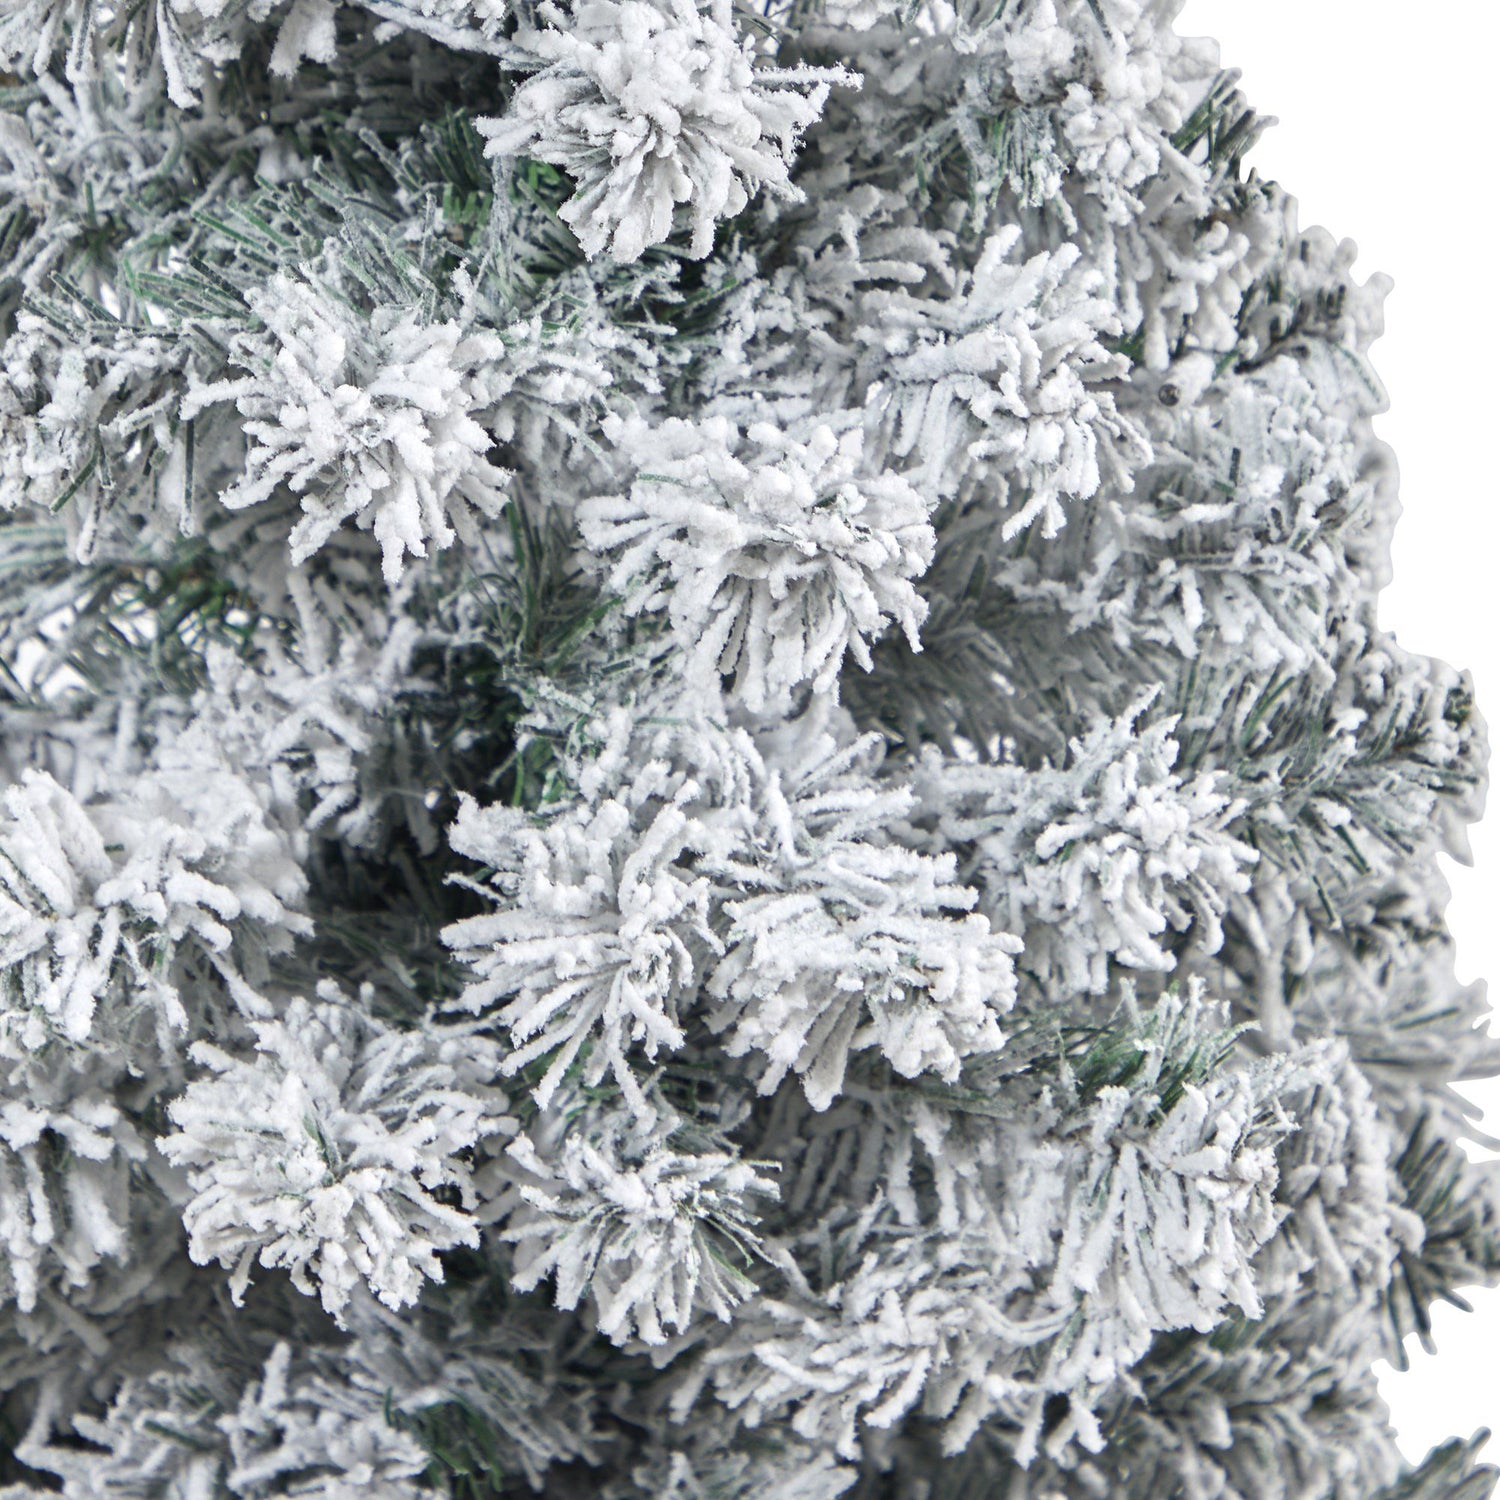 44” Flocked Rock Springs Spruce Artificial Christmas Tree with 50 Clear LED Lights in Red Tower Planter